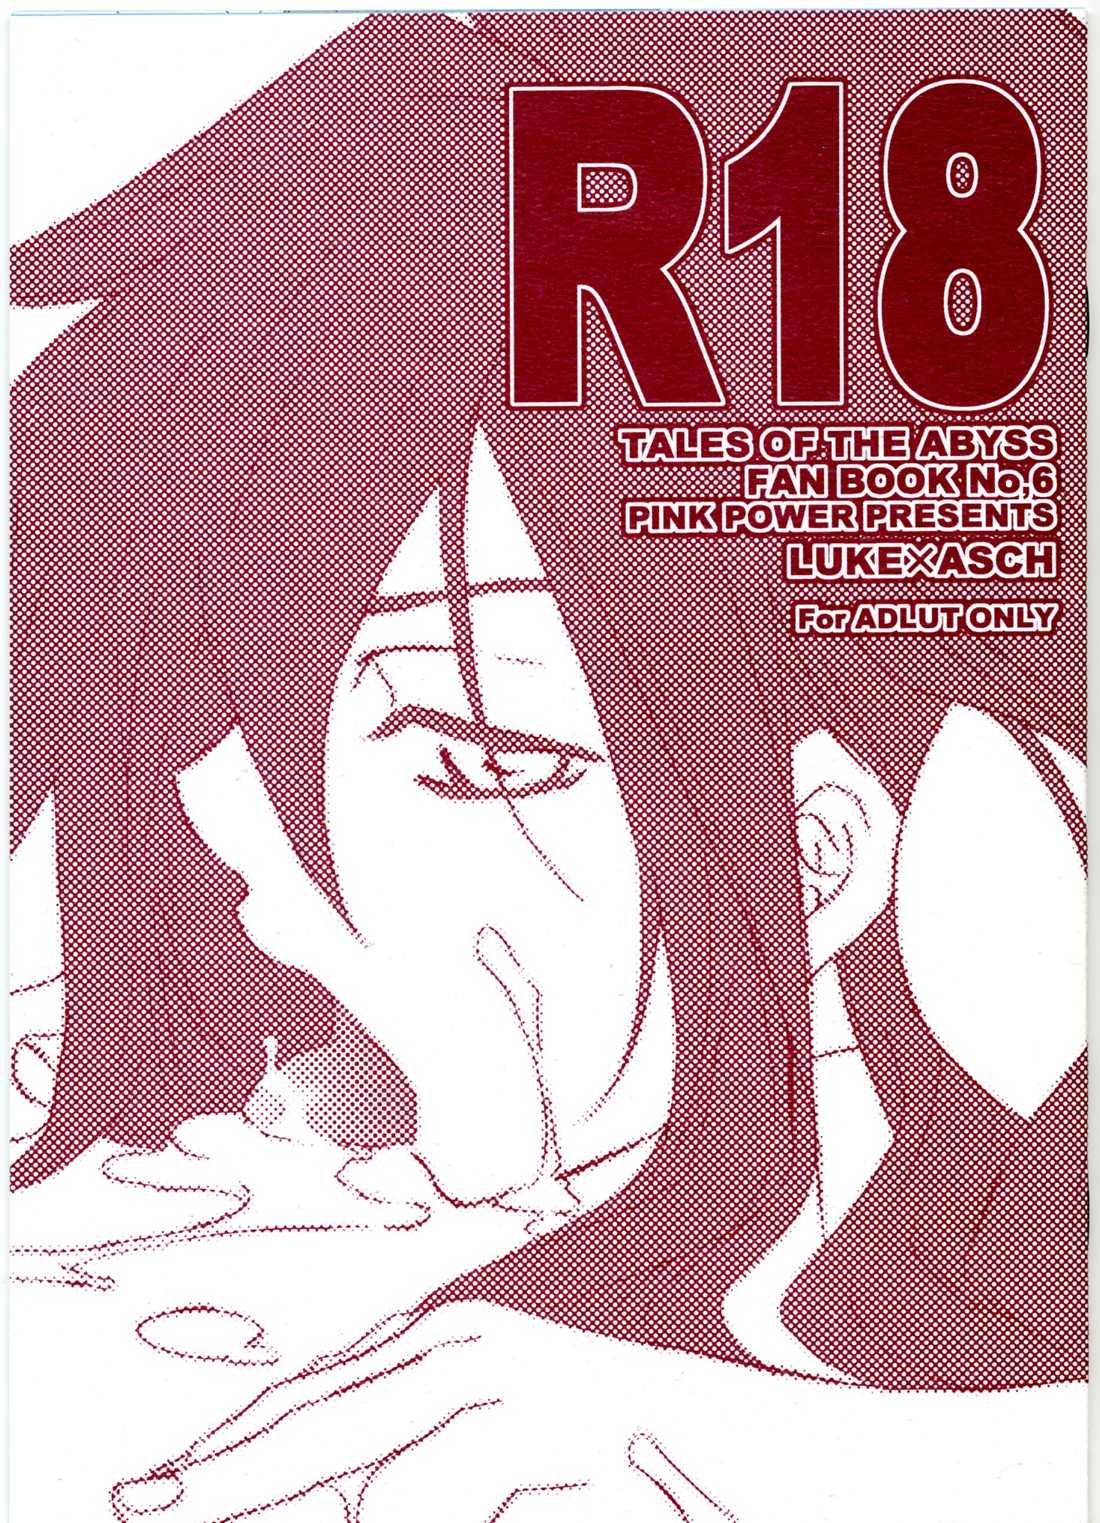 [PINK POWER] R18 